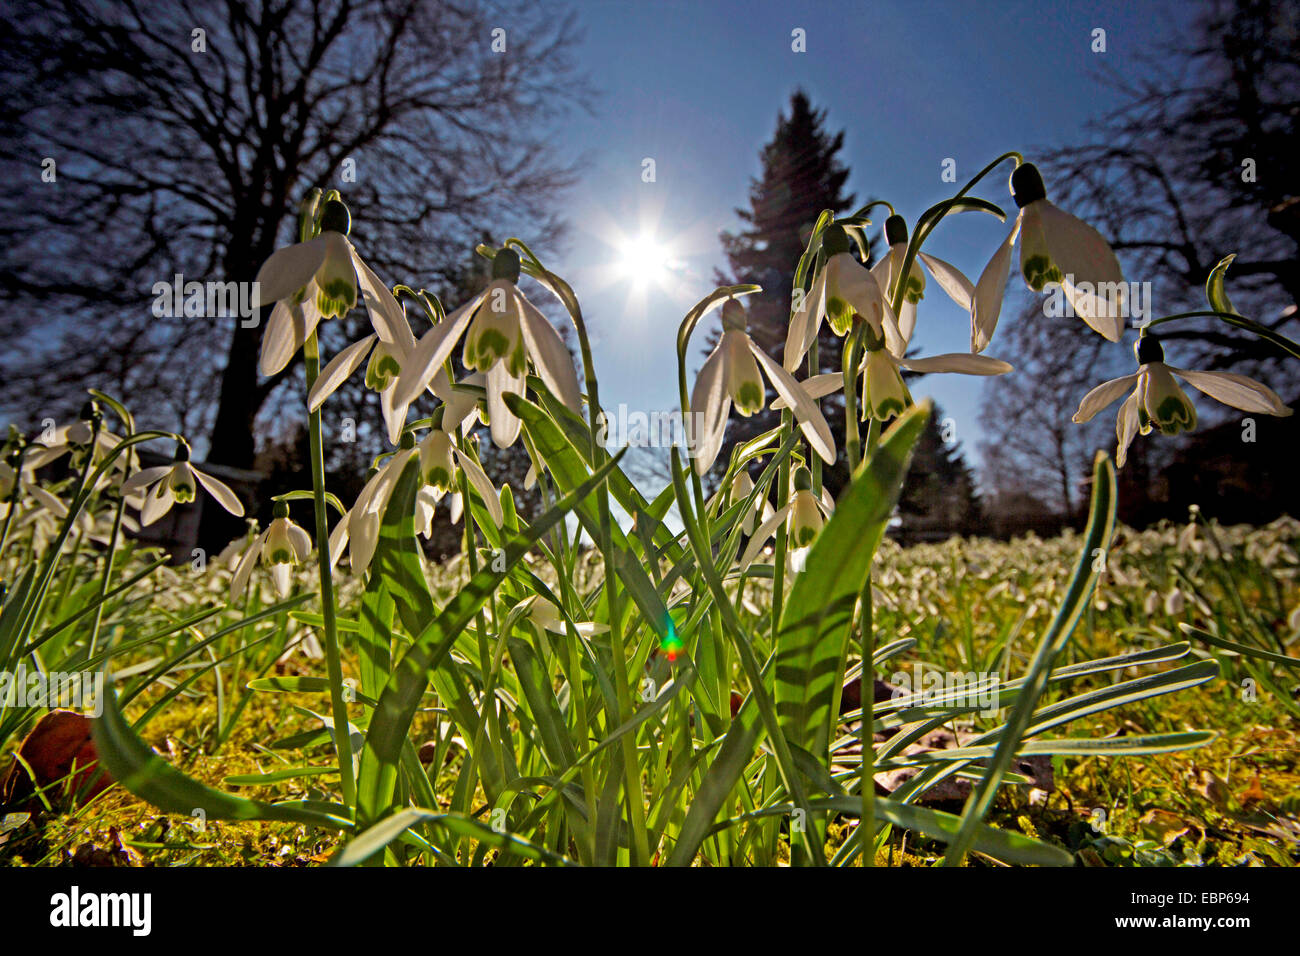 common snowdrop (Galanthus nivalis), blooming in backlight, Germany, Saxony Stock Photo